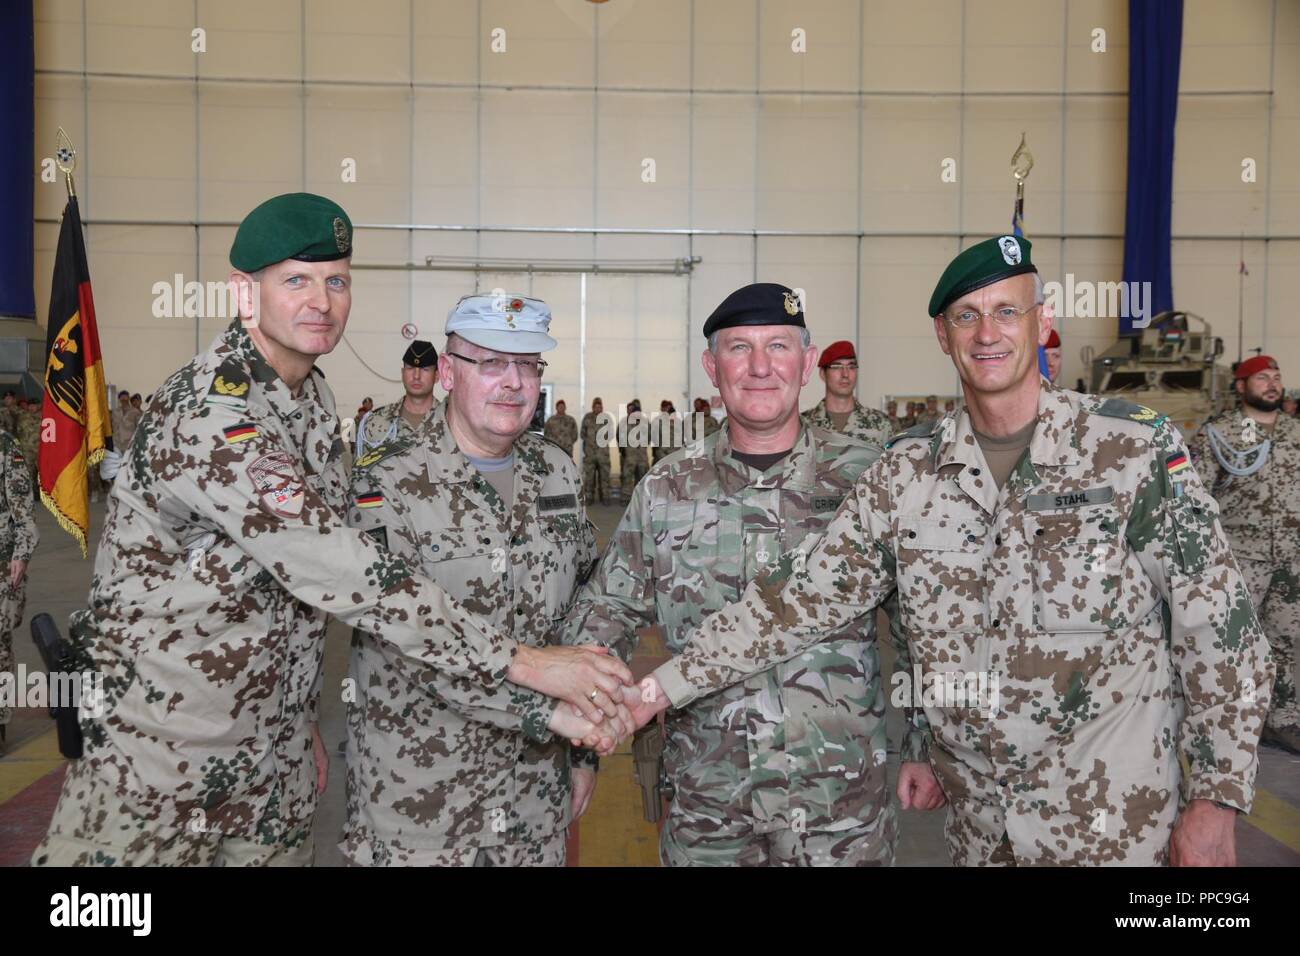 German Army Brig. Gen. Ernst-Peter Klaffus (from left), German Army Lt. Gen. Erich Pfeffer, British Army Lt. Gen. Richard Cripwell and German Army Brig. Gen. Wolf-Jürgen Stahl pose for a photo after the transfer of authority ceremony at TAAC-North on August 21, 2018 in Mazar-e Sharif, Afghanistan. Klaffus is the incoming commander for TAAC-North. Stock Photo